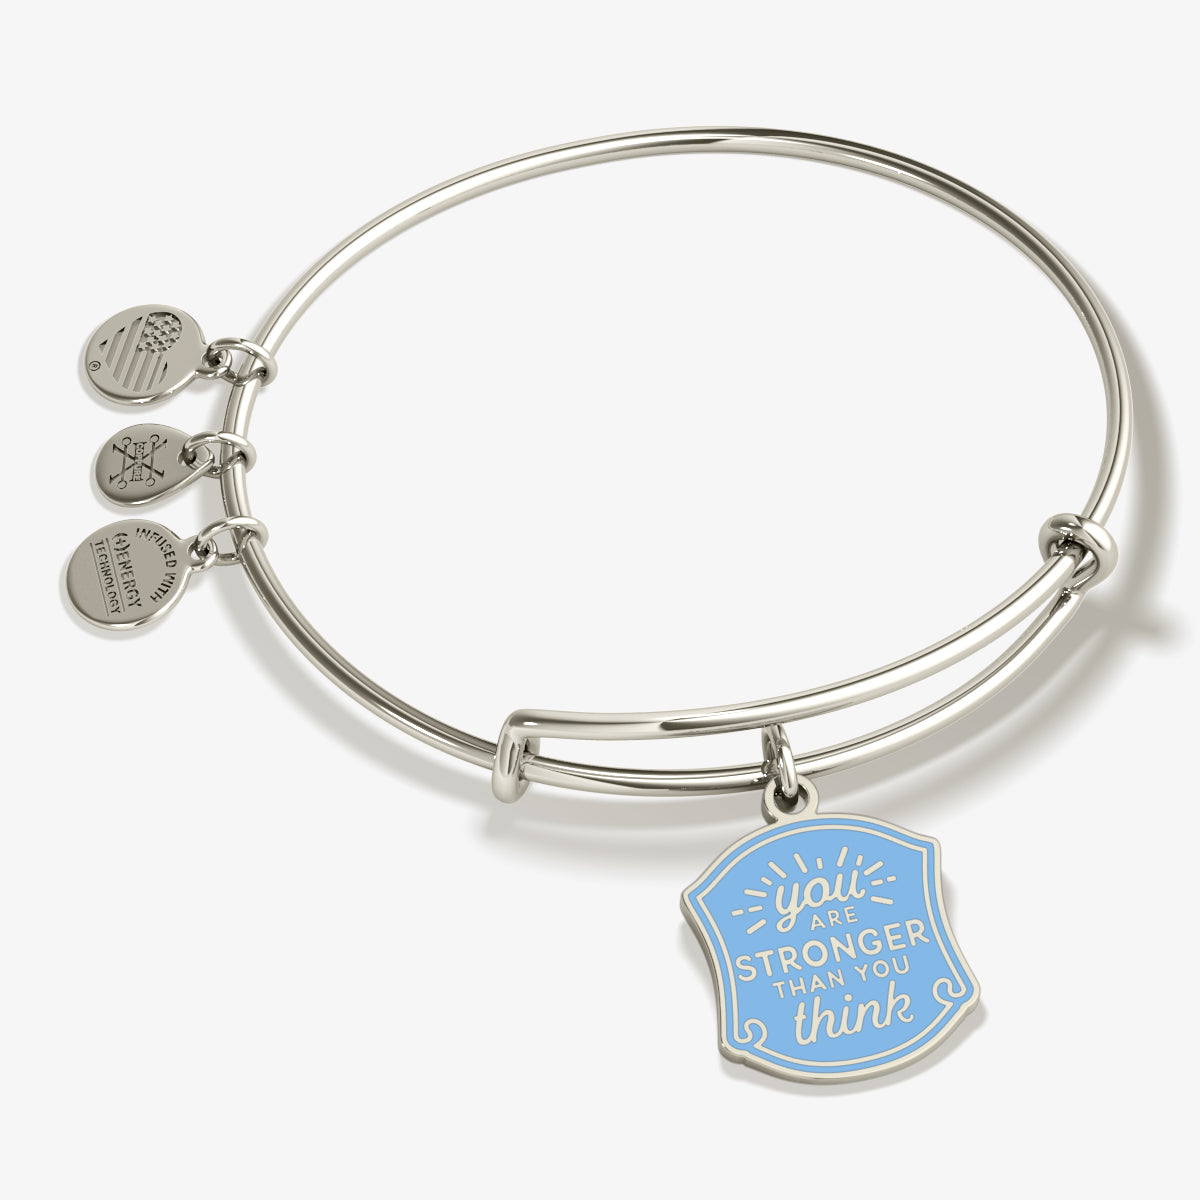 'You Are Stronger Than You Think' Charm Bangle Bracelet